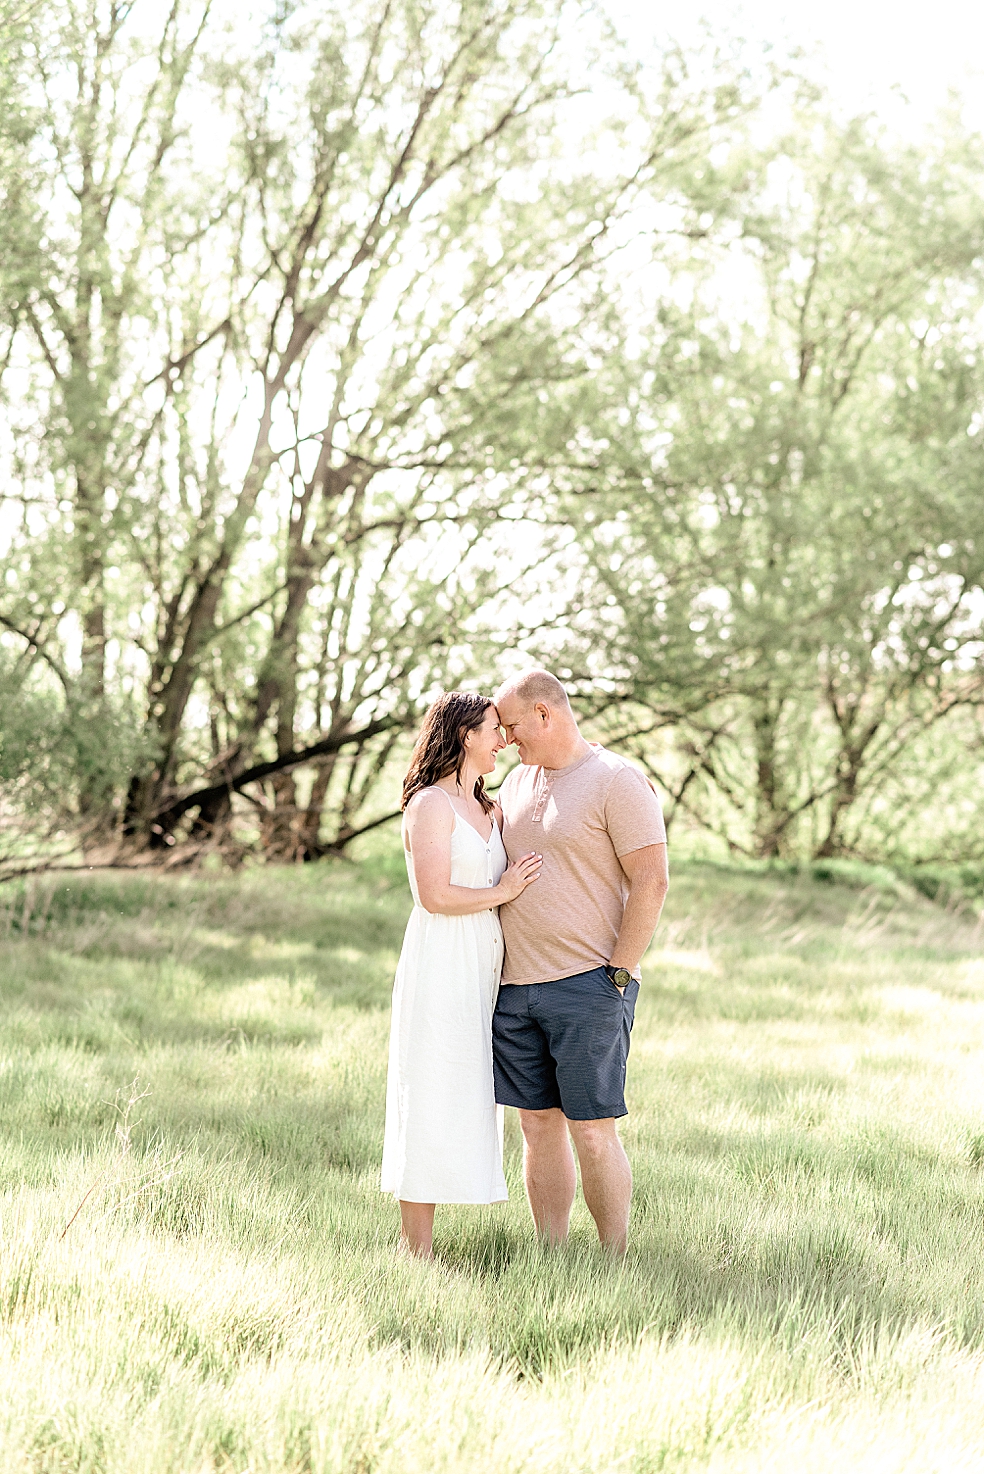 Mom and dad snuggling in a field | Photo by Light and Airy Alabama Photographer Jessica Lee 